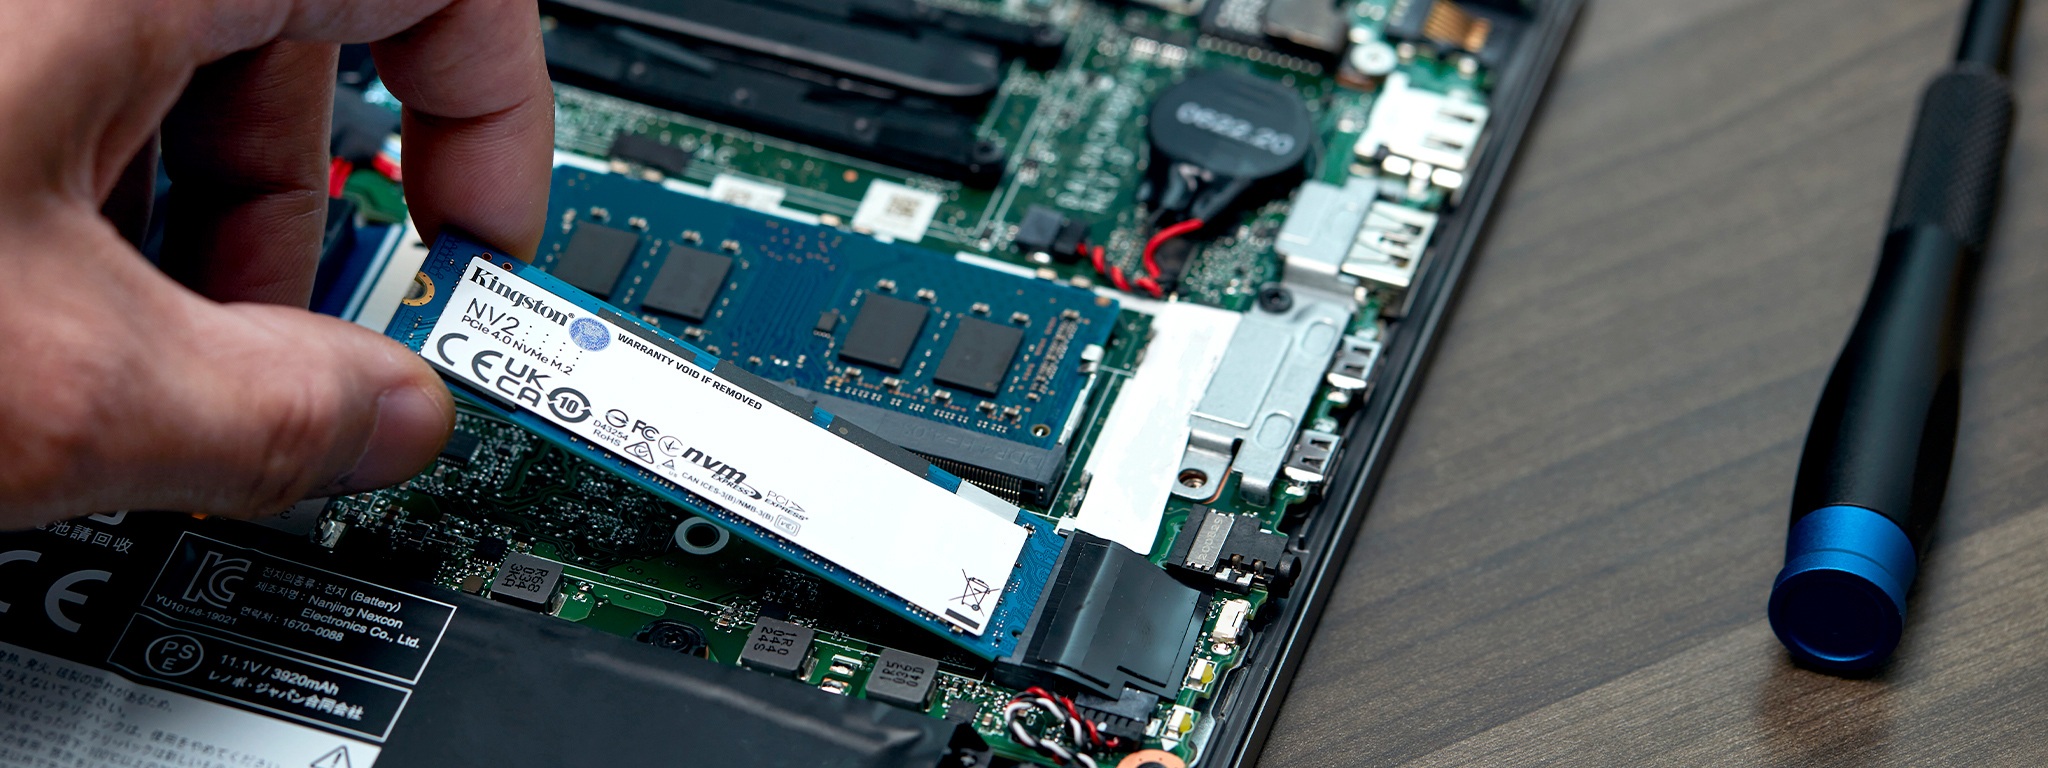 A close-up on a hand installing Kingston NV2 SSD in a laptop